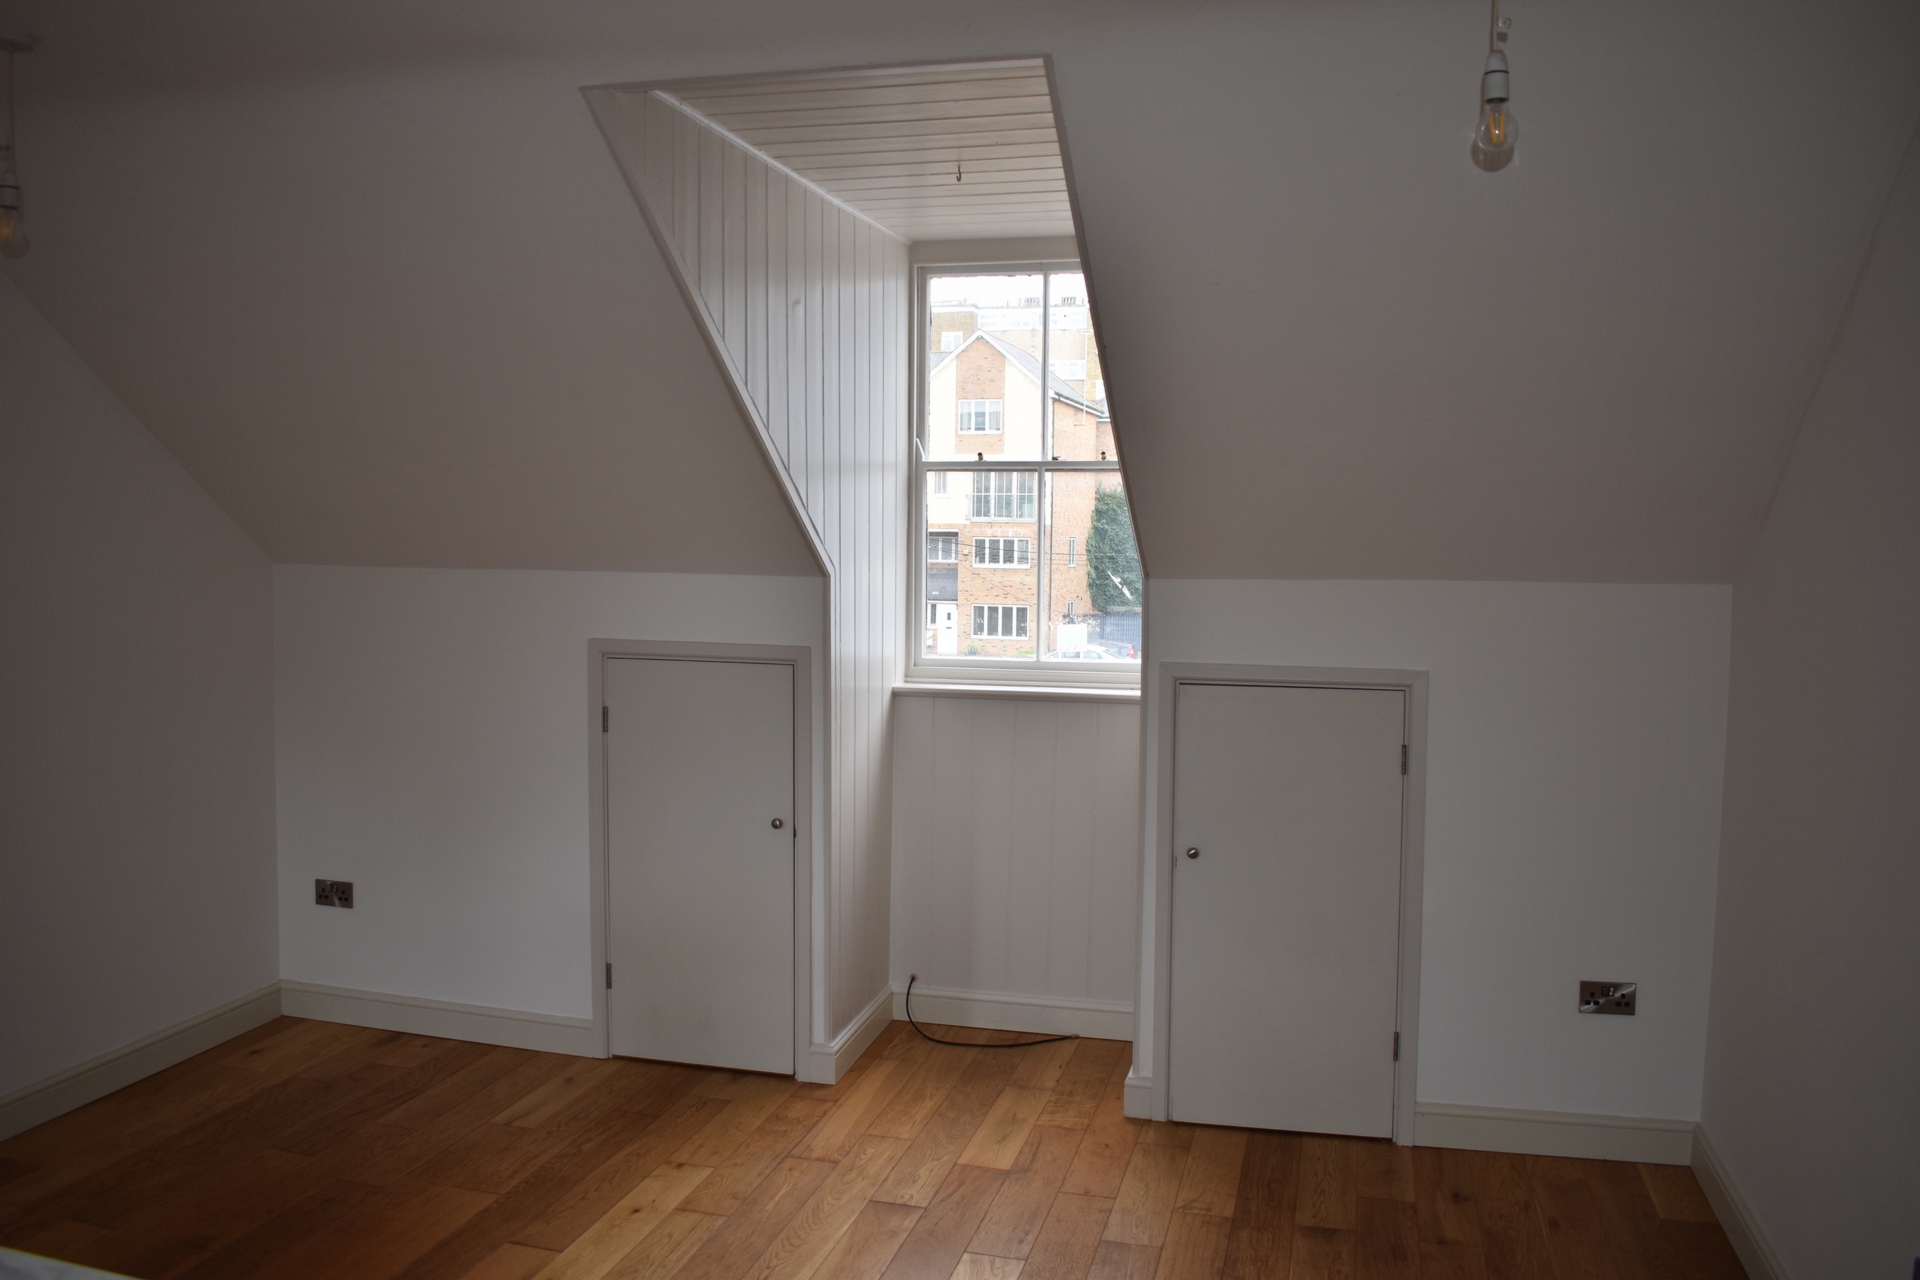 Henderson Setterfield are thrilled to offer this 1st floor 2 bedroom property situated in the centre of Ramsgate Town, close to all shops, bars, restaurants and a short walk from Ramsgate Beach, it is close to the train station and on the main bus route. 